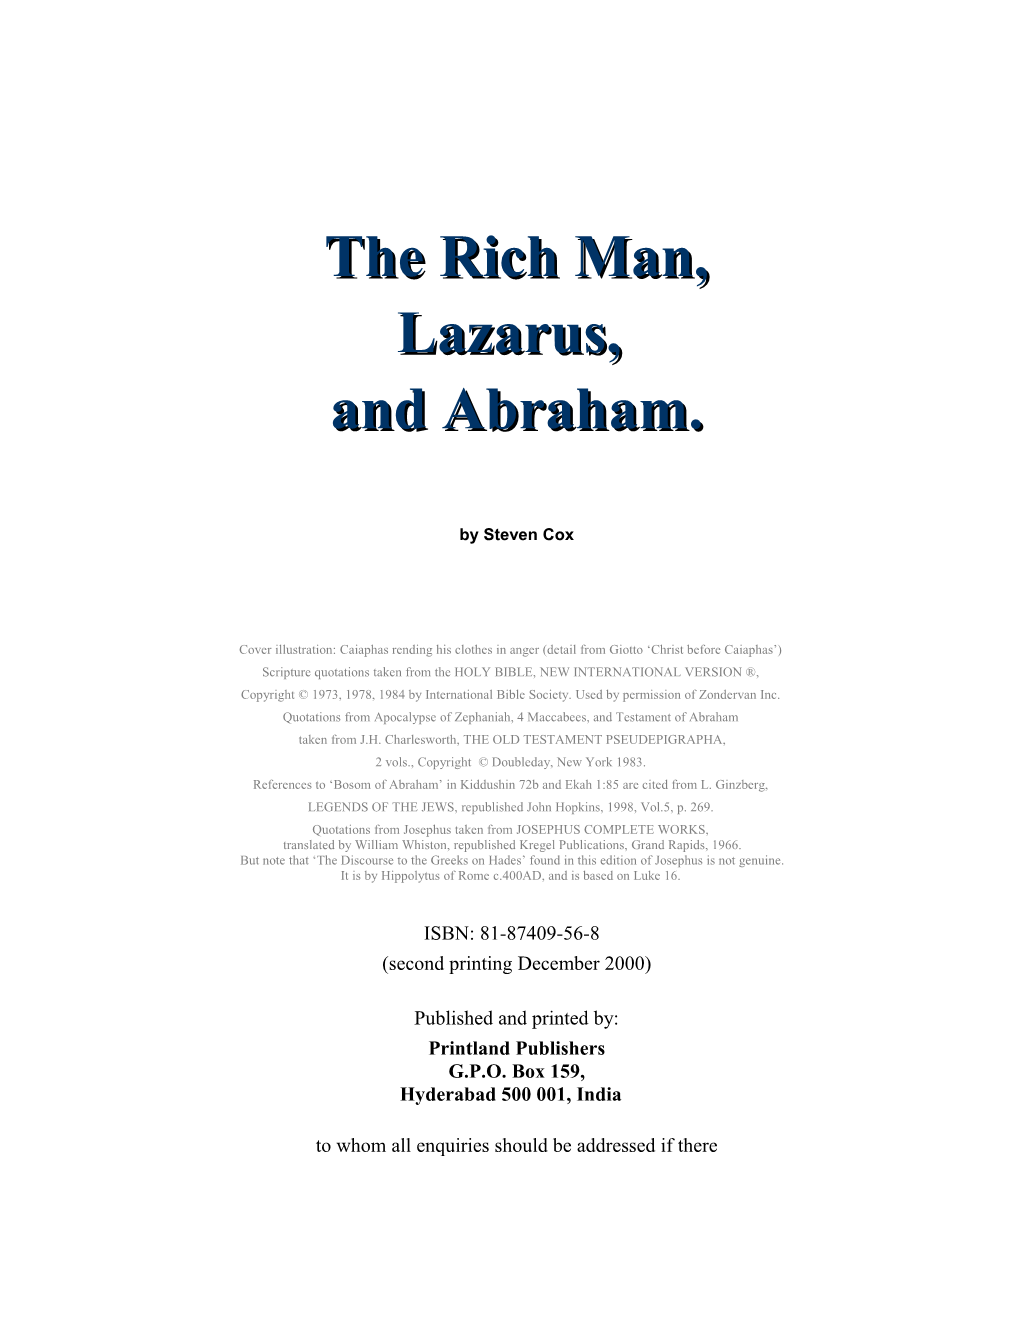 The Rich Man,Lazarus, and Abraham